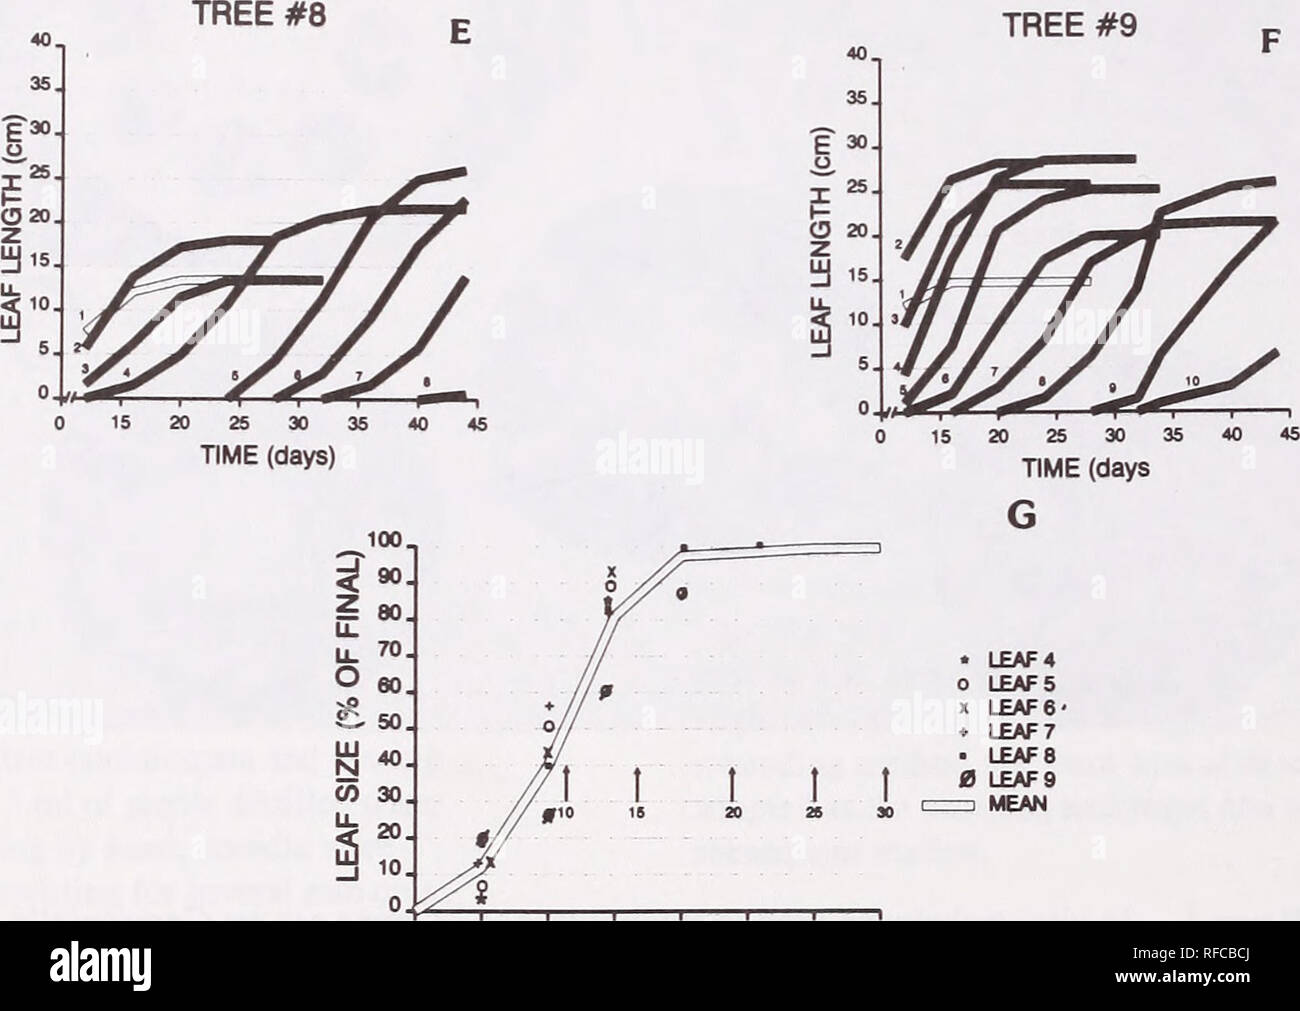 . Recent research on foliage diseases : conference proceedings : Carlisle, Pennsylvania, May 29-June 2, 1989. Leaves Diseases and pests United States Congresses. 1 5 9 13 17 21 25 29 TIME AFTER APPEARANCE (DAYS) Figure 2.—A-G. Leaf development of six green ash seedlings grown in the greenhouse. A-F. Size (leaf length) of individual leaves at up to 10 nodes. Length of one leaf per node measured from axillary leaf bud to tip of terminal leaflet. Leaves numbered in order of appearance from bottom to top of shoot. Growth curves of individual leaves based on a greenhouse grown green ash seedling tr Stock Photo